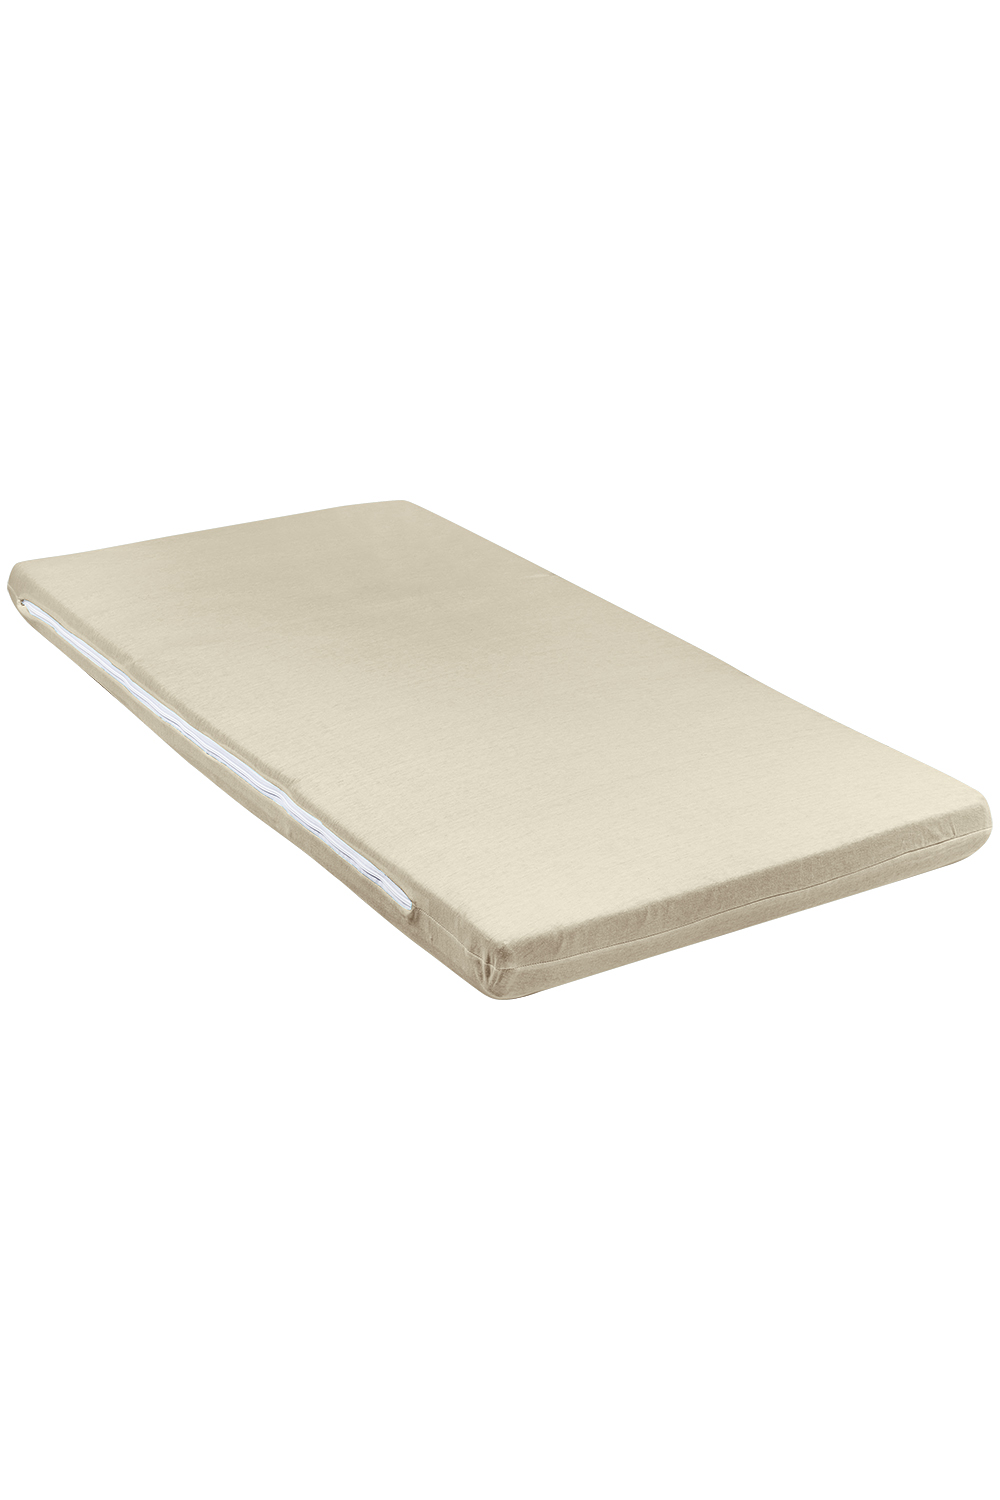 Campingbed matrashoes deluxe Uni - sand - 60x120cm